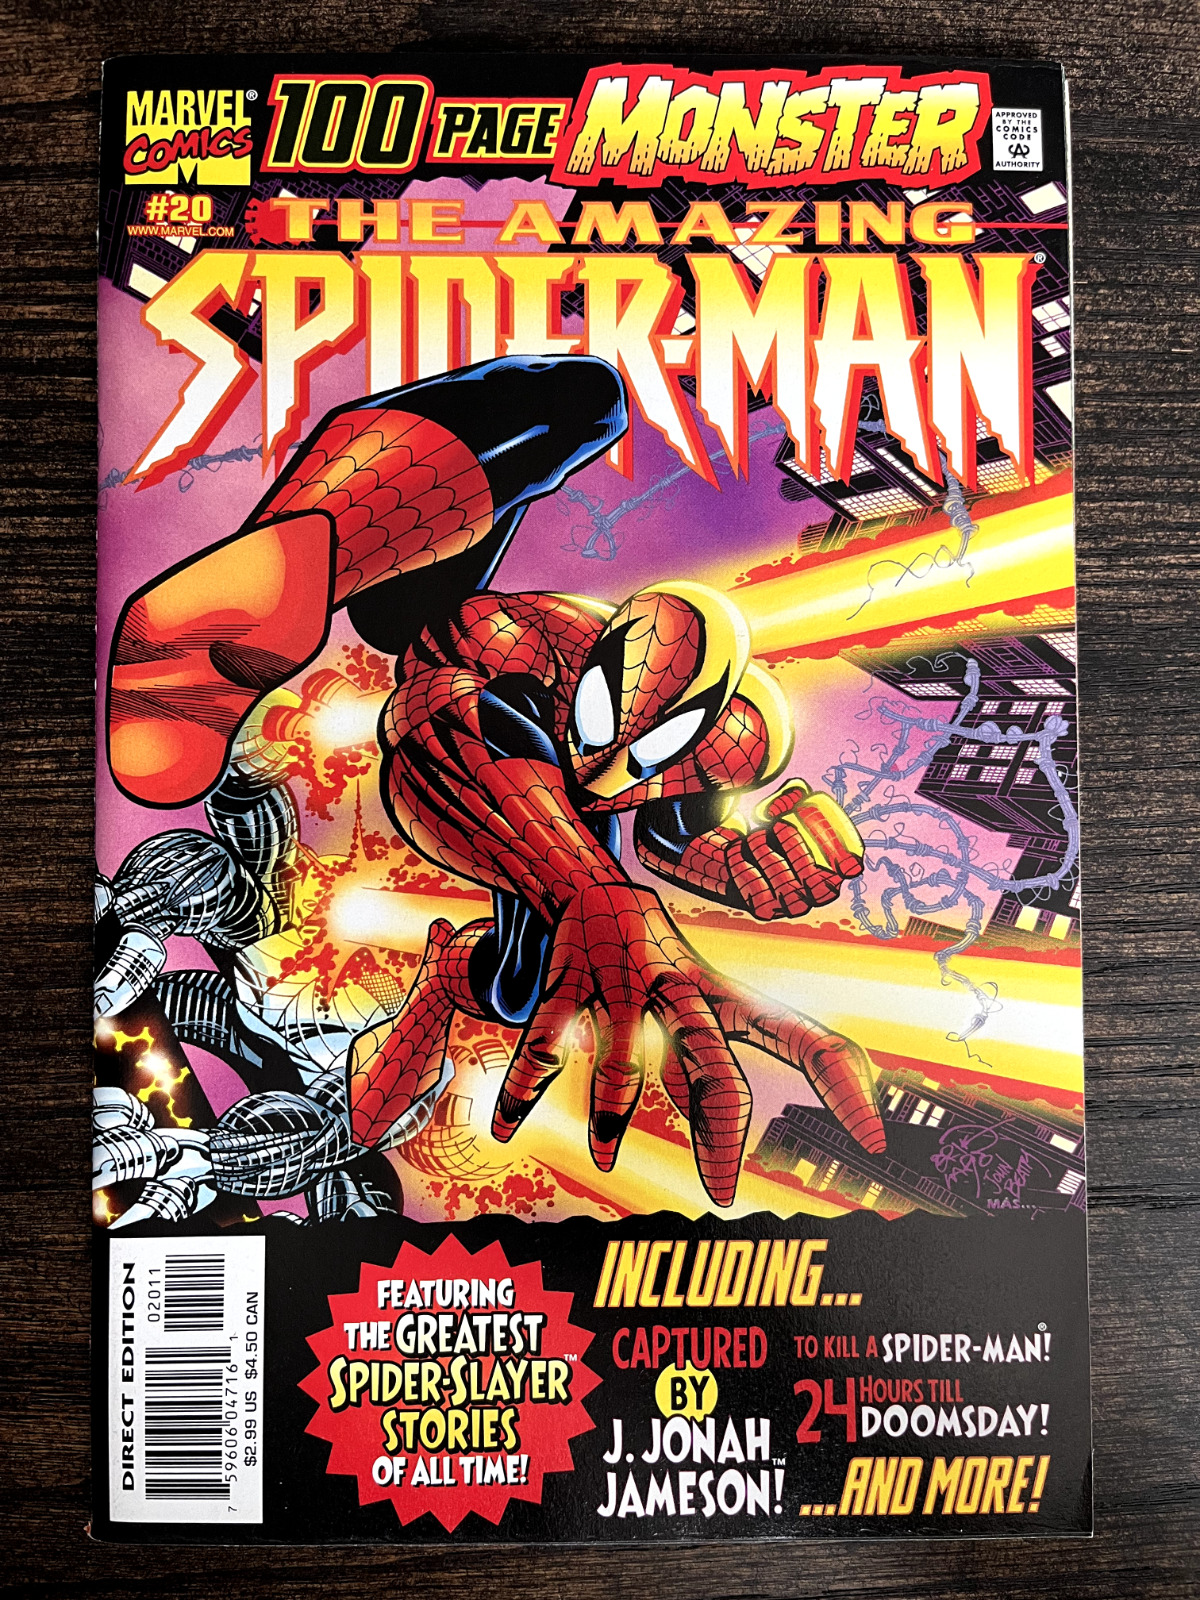 THE AMAZING SPIDER-MAN #20 100 PAGE MONSTER (Marvel 2000)